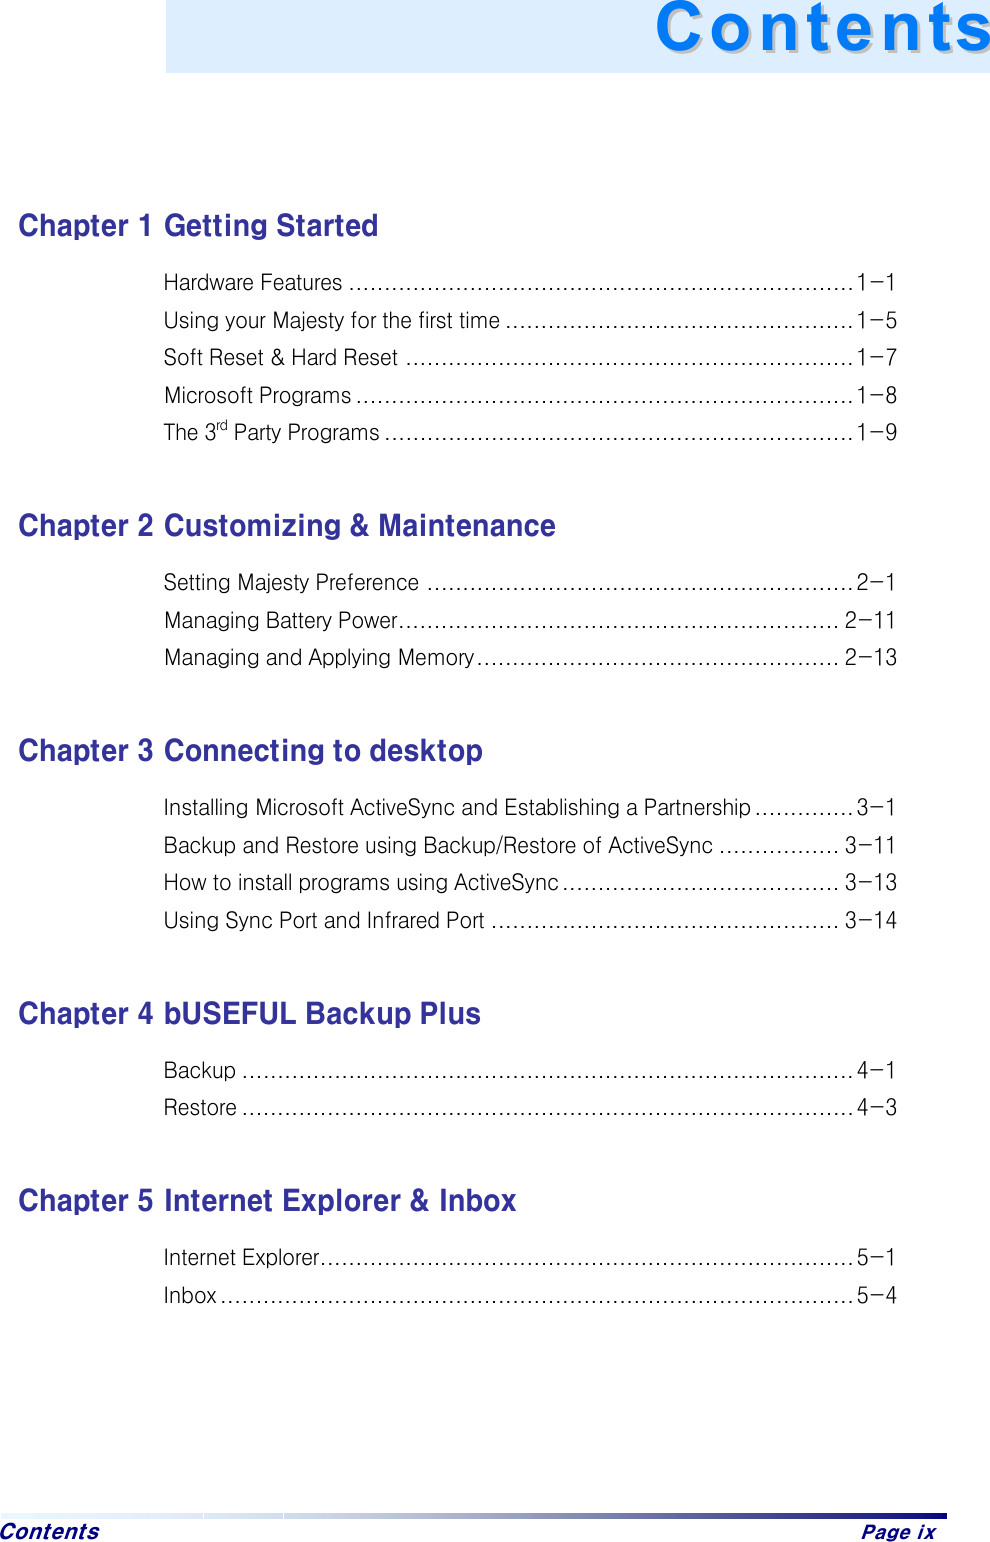  Contents   Page ix    Chapter 1 Getting Started Hardware Features ....................................................................... 1-1 Using your Majesty for the first time ................................................. 1-5 Soft Reset &amp; Hard Reset ............................................................... 1-7 Microsoft Programs ...................................................................... 1-8 The 3rd Party Programs ..................................................................1-9  Chapter 2 Customizing &amp; Maintenance Setting Majesty Preference ............................................................ 2-1 Managing Battery Power.............................................................. 2-11 Managing and Applying Memory................................................... 2-13  Chapter 3 Connecting to desktop Installing Microsoft ActiveSync and Establishing a Partnership .............. 3-1 Backup and Restore using Backup/Restore of ActiveSync ................. 3-11 How to install programs using ActiveSync....................................... 3-13 Using Sync Port and Infrared Port ................................................. 3-14  Chapter 4 bUSEFUL Backup Plus Backup ...................................................................................... 4-1 Restore ...................................................................................... 4-3  Chapter 5 Internet Explorer &amp; Inbox Internet Explorer........................................................................... 5-1 Inbox ......................................................................................... 5-4     CCoonntteennttss